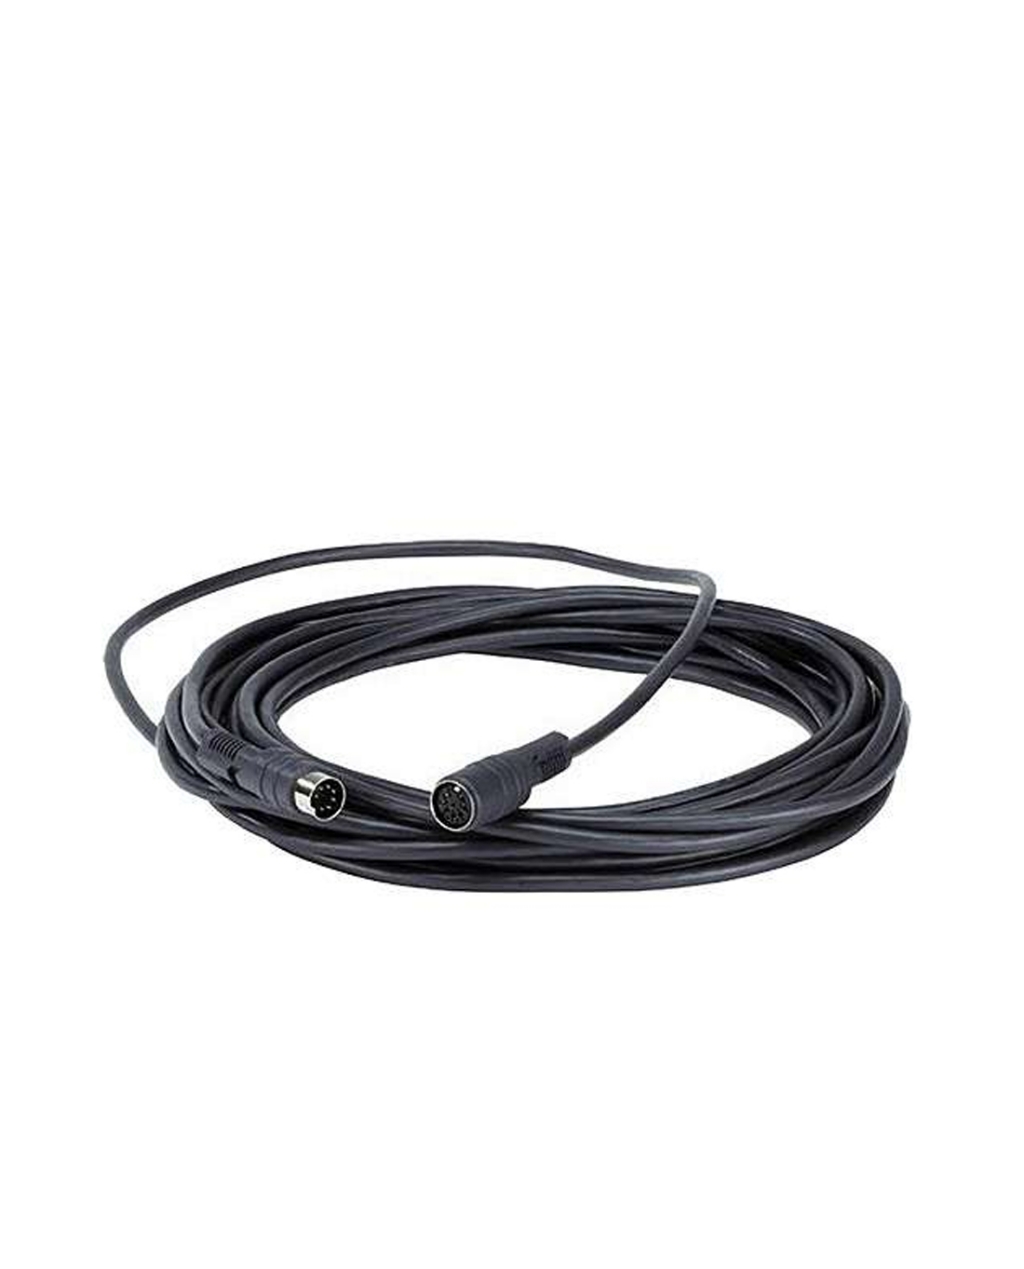 LBB 3316/10 −Extension Cable, 10M